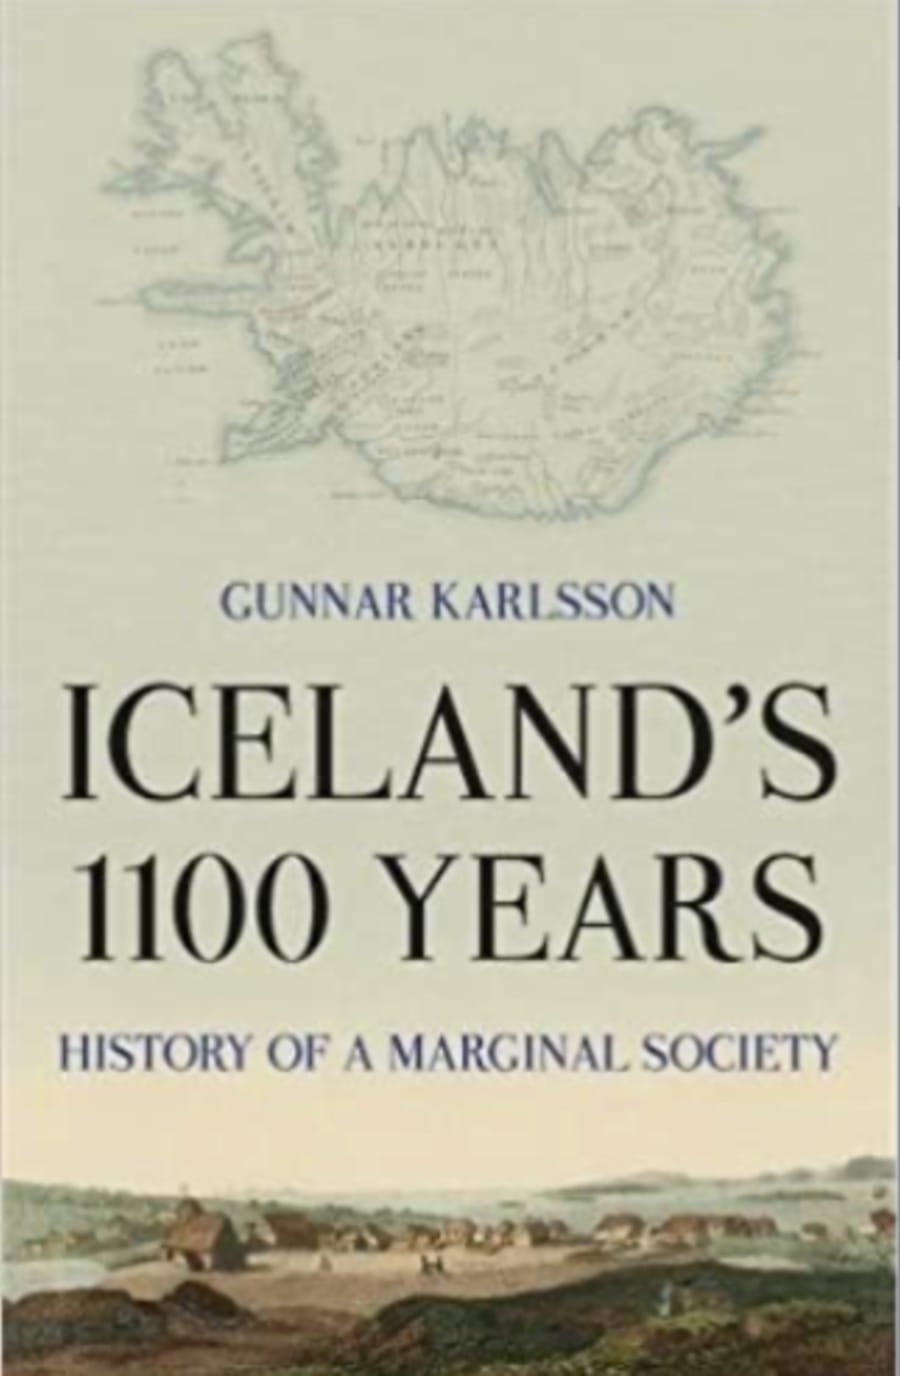 Icelands 1100 years